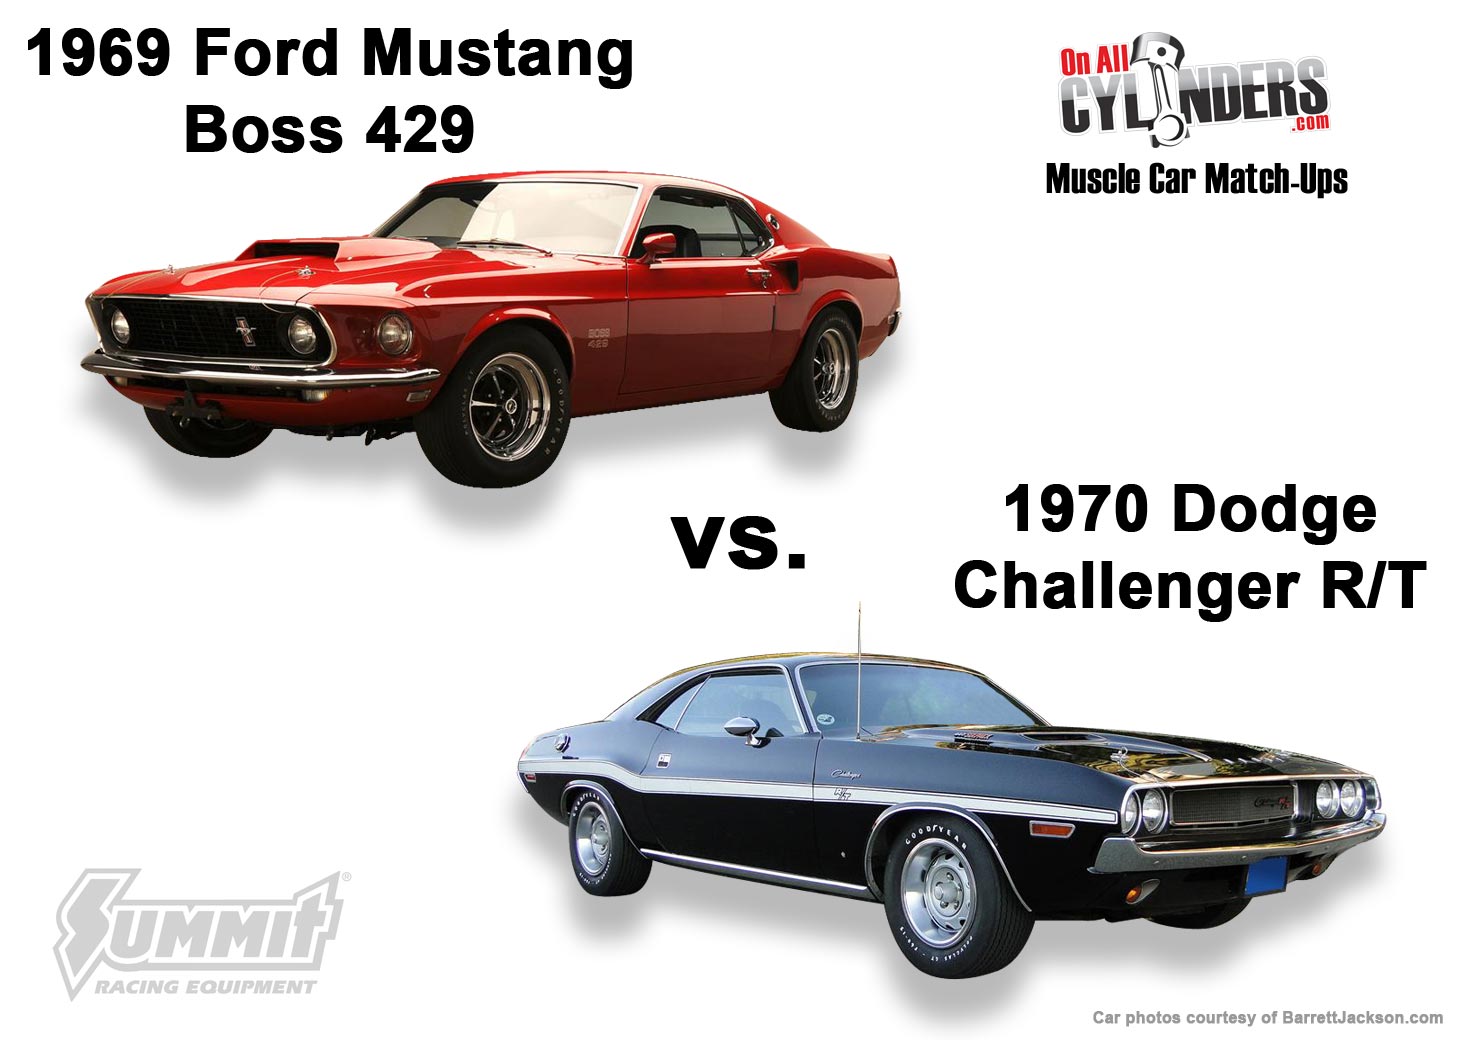 Vote! Muscle Car Match-Ups: Round 2 - OnAllCylinders